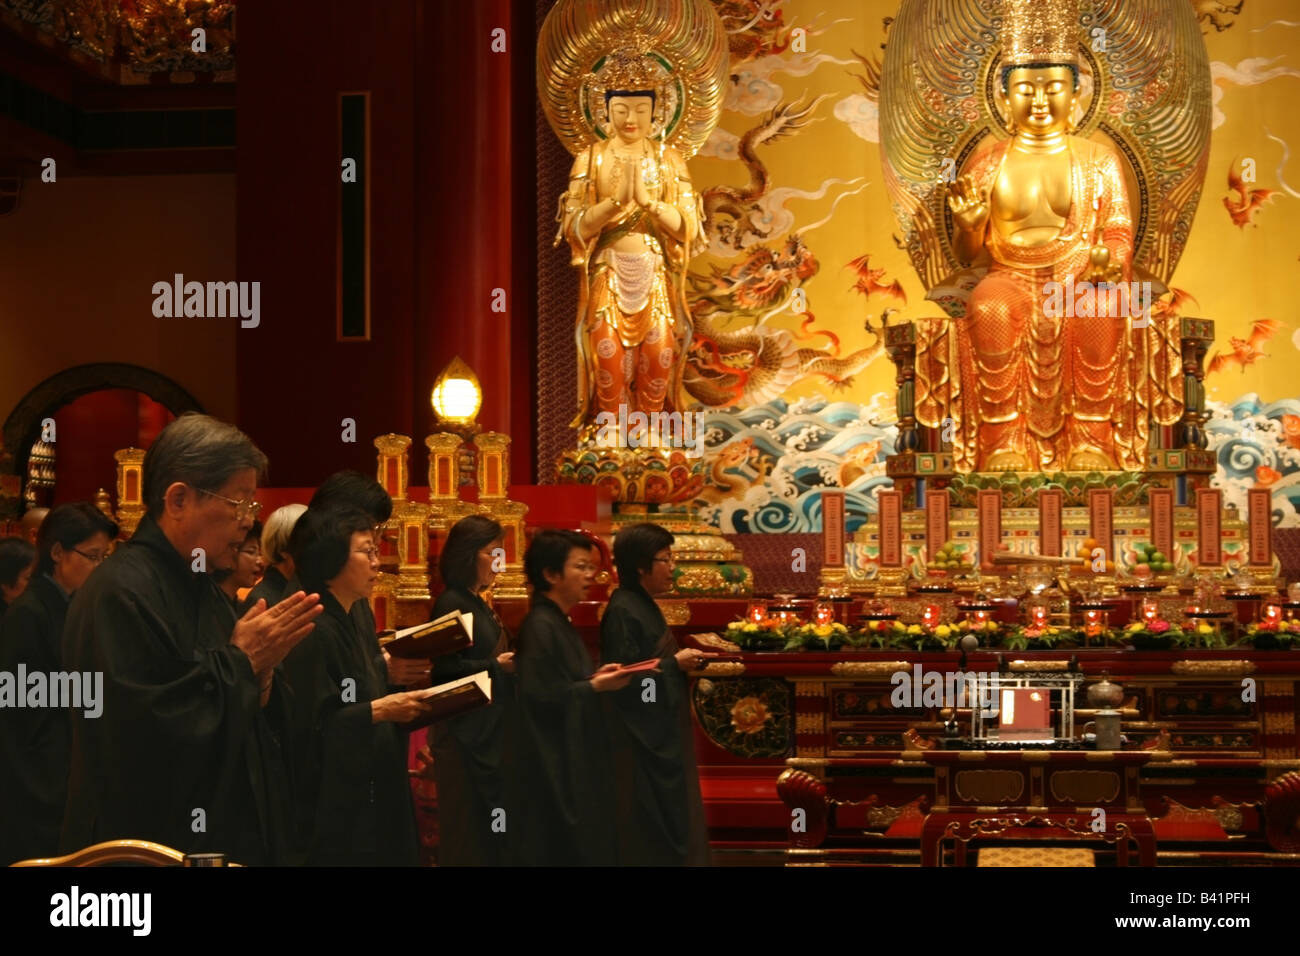 Buddhist followers during a service at The Buddha Tooth Relic temple, Singapore, South East Asia Stock Photo